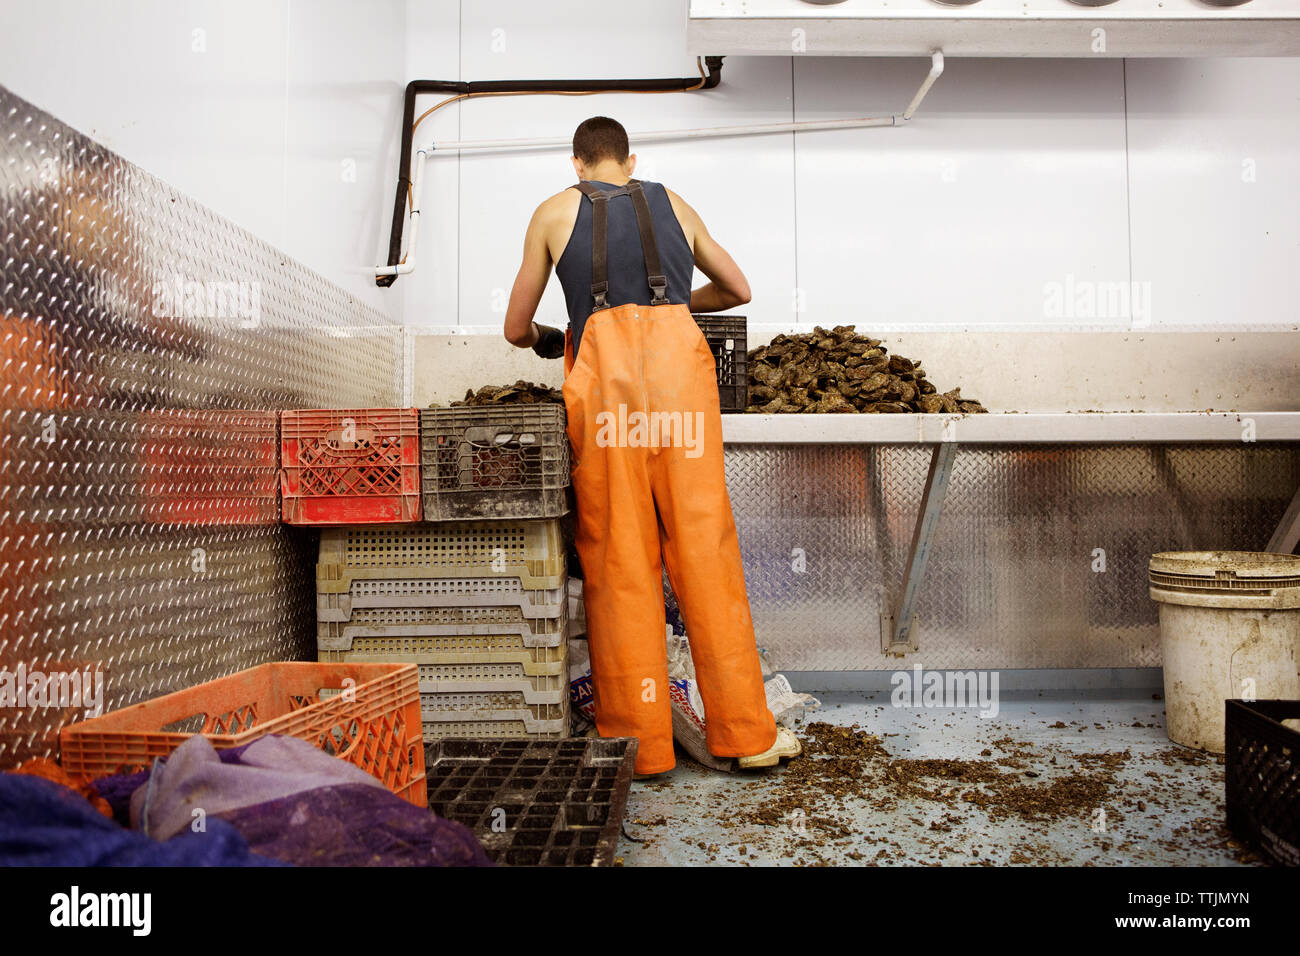 Rear view of man working in fishing industry Stock Photo